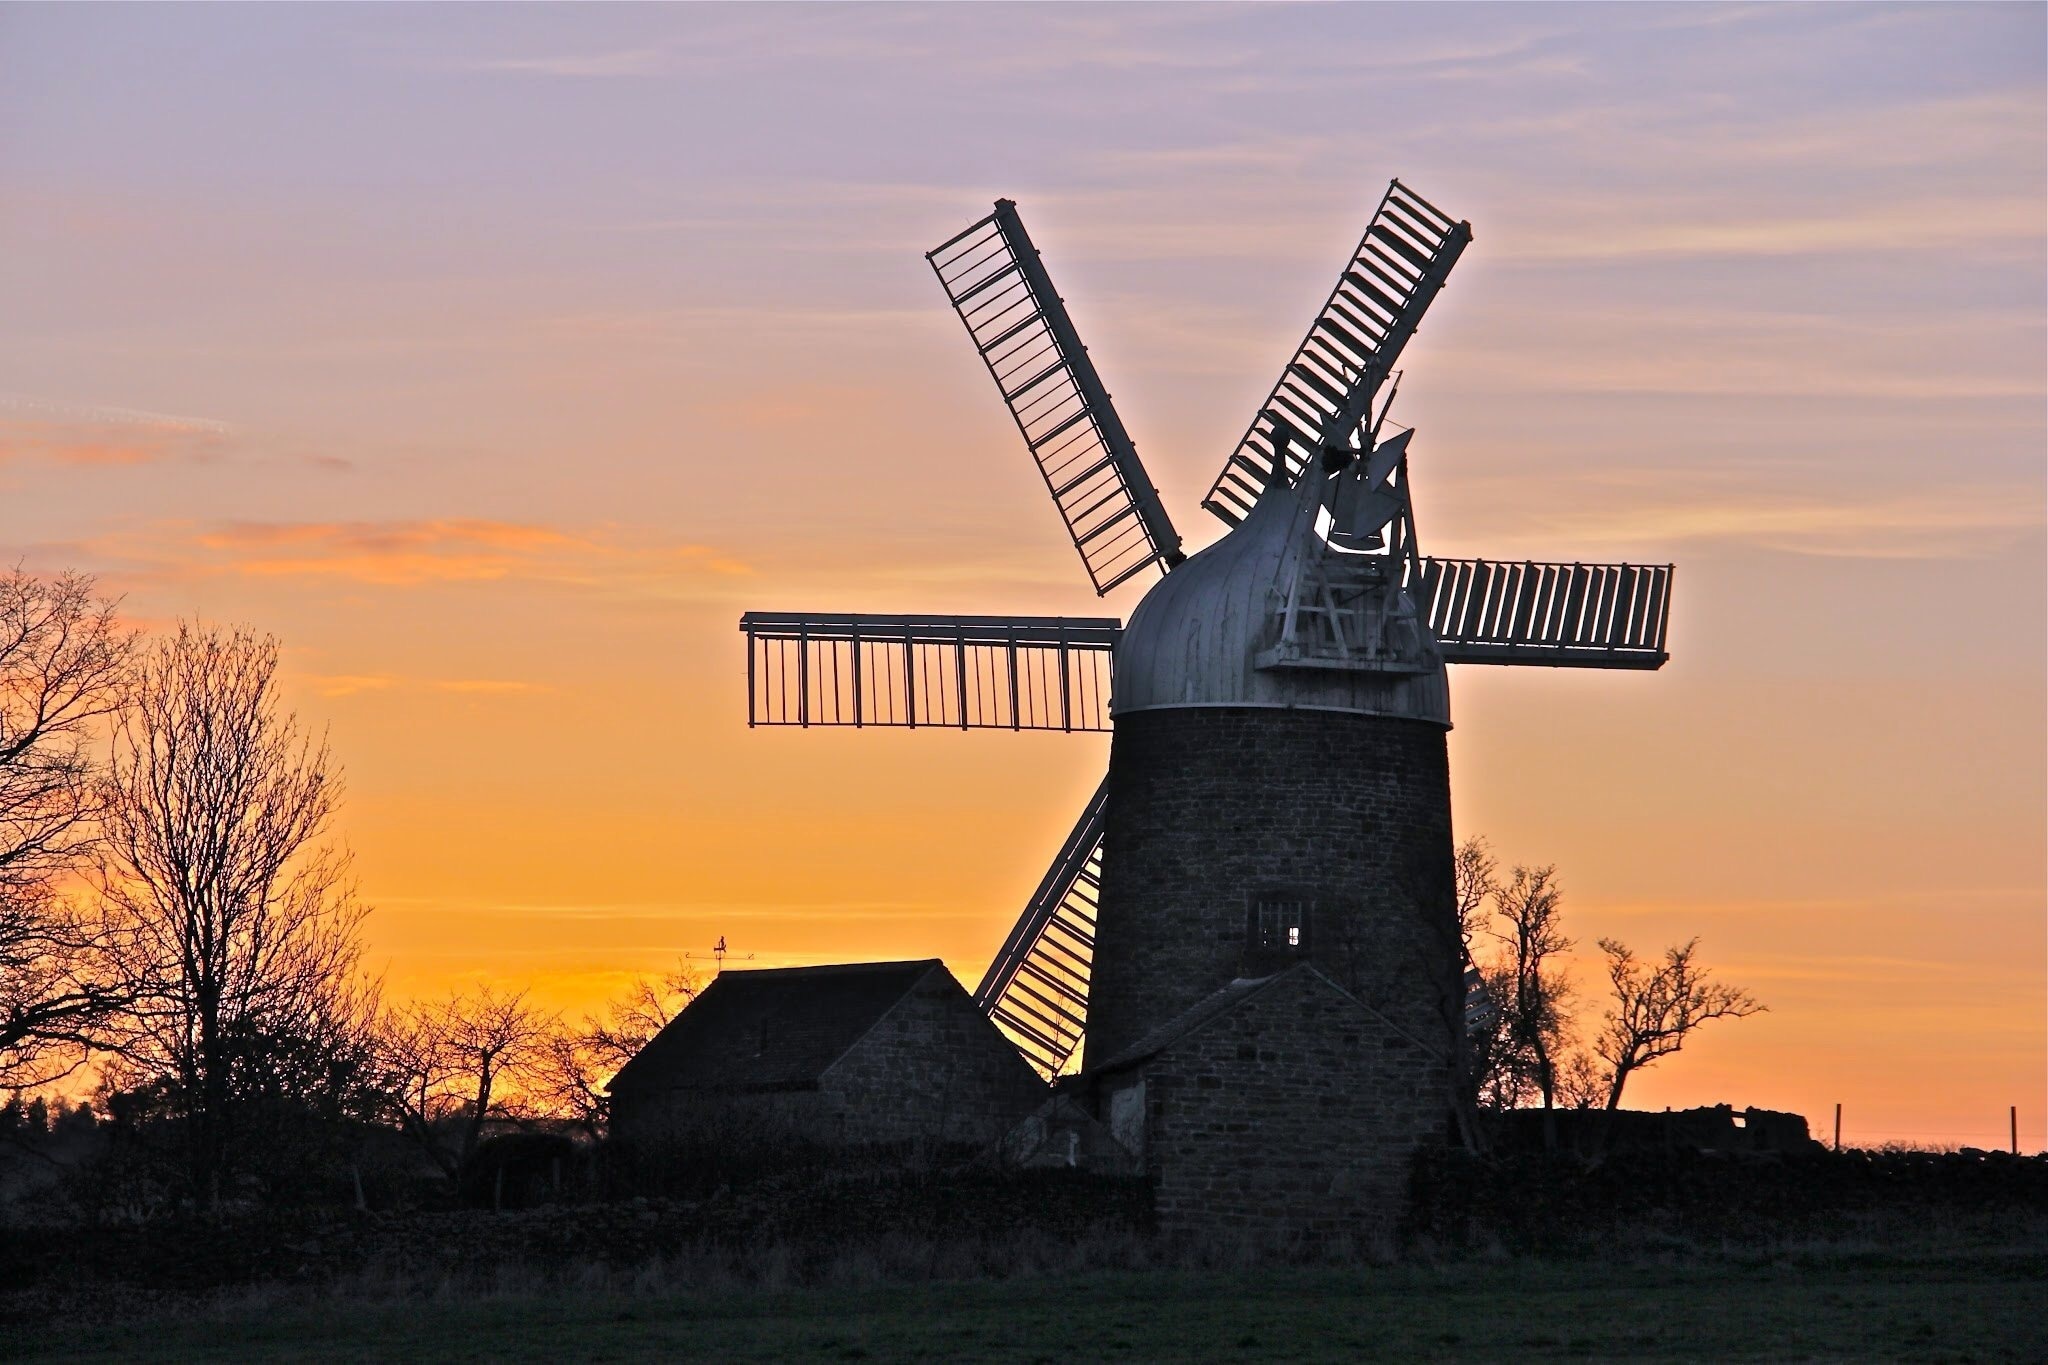 Heage Windmill, Derby - a rural urban place in Derby where this old historic working windmill on the Lonely Planet #nationalpark #historicalsite #hiking #travel #England #nature #landscape 
